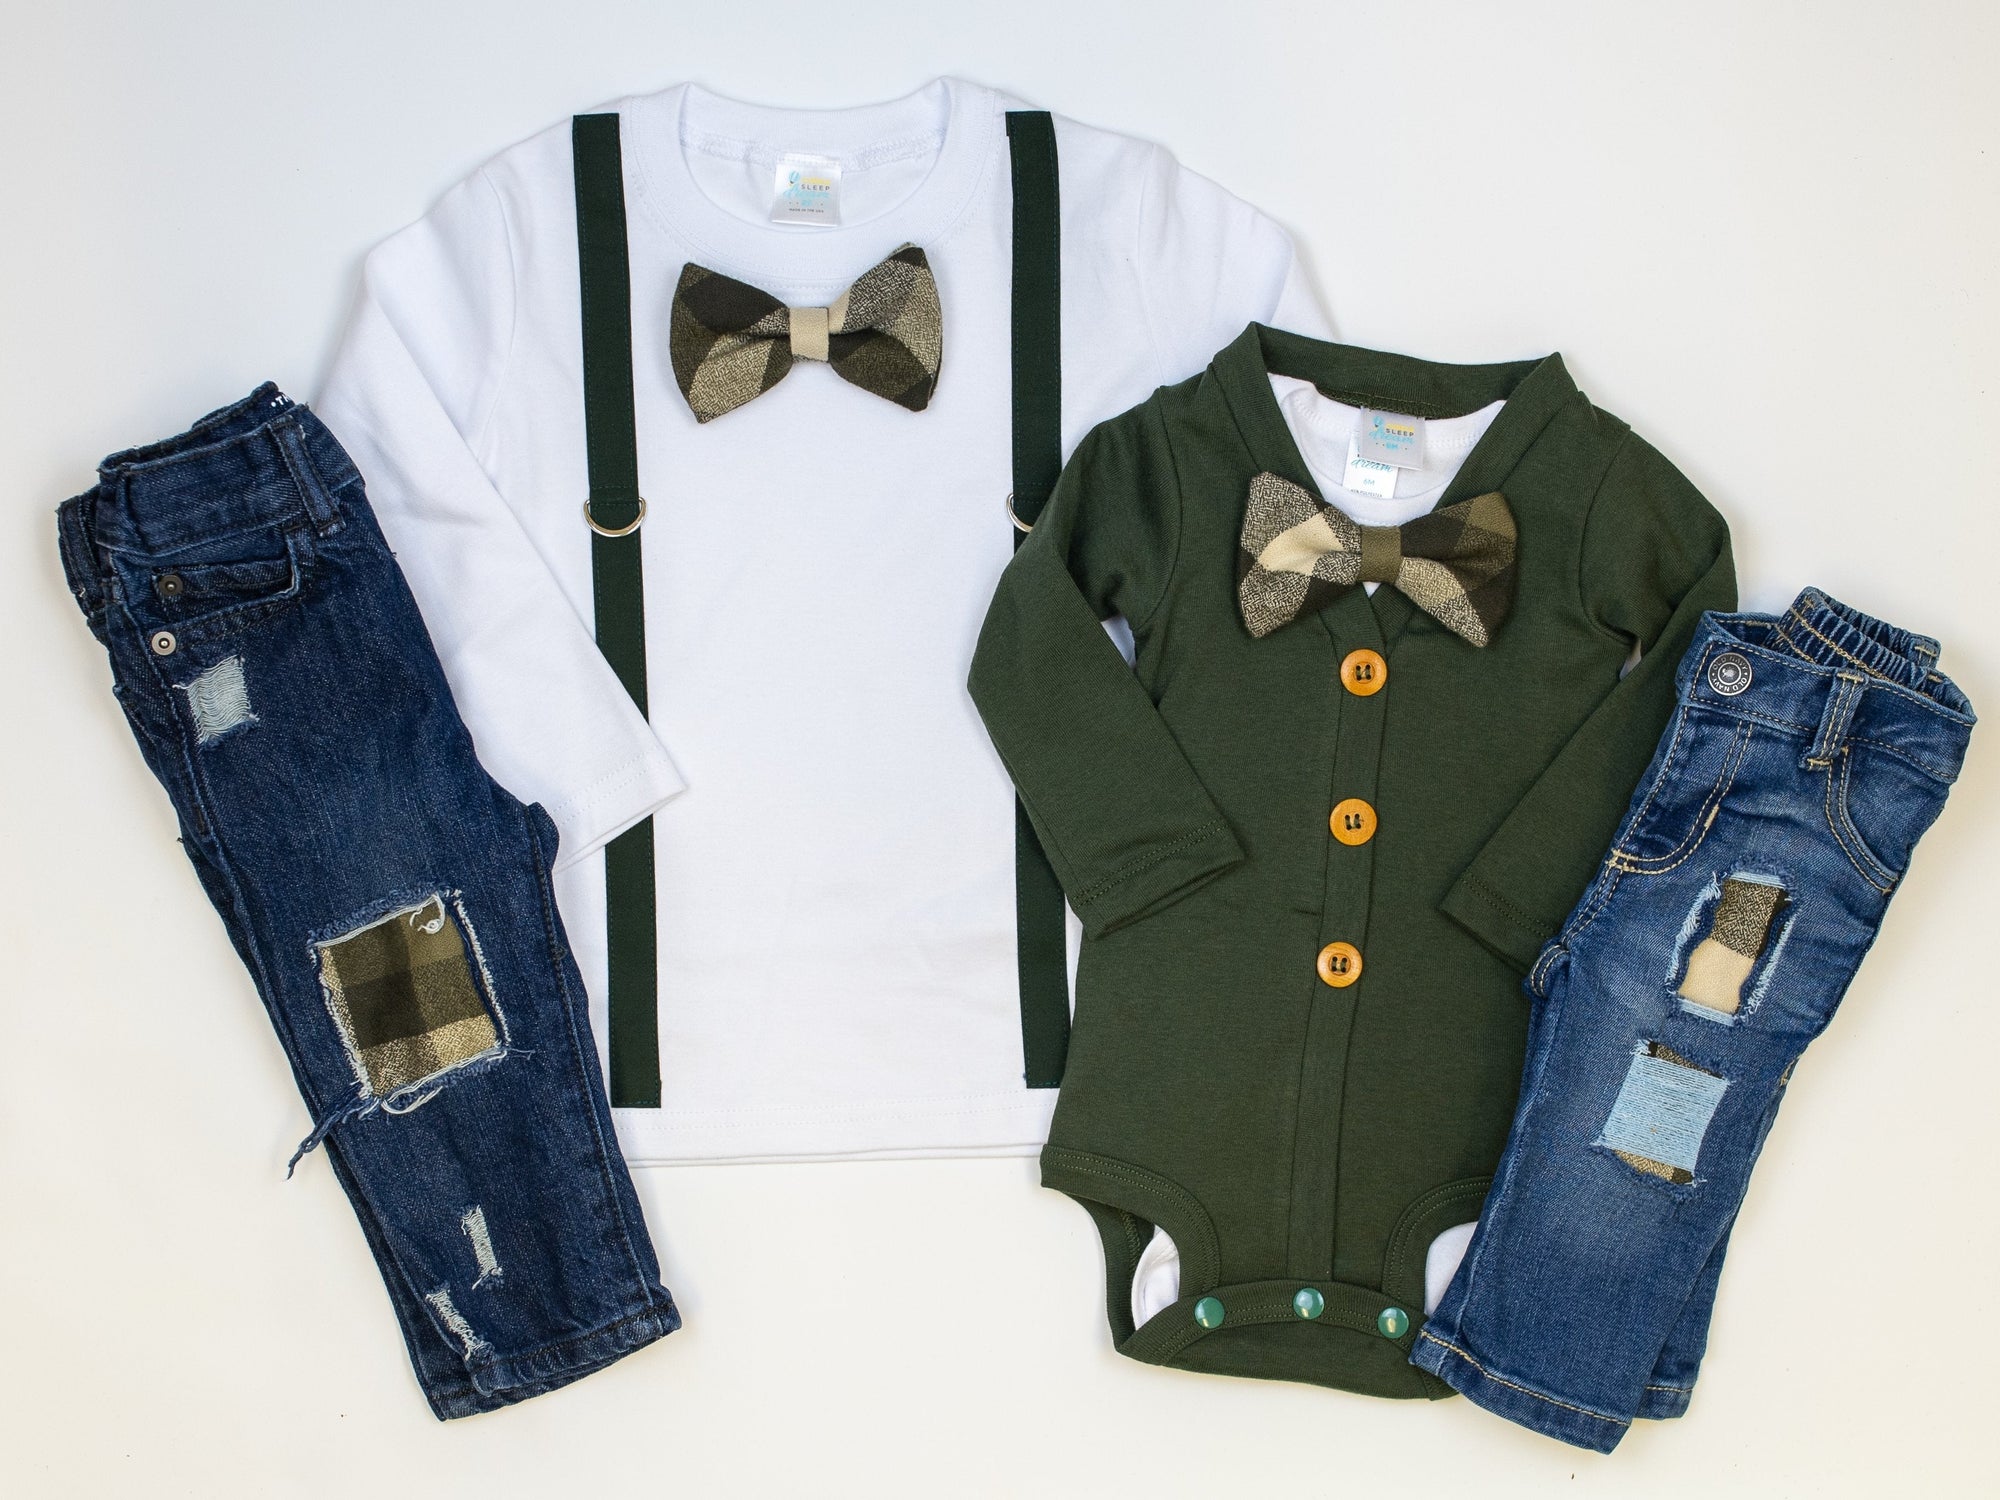 Cuddle Sleep Dream Oh Snap 2t Long Sleeve Tshirt Forest Suspender | Olive & Brown Plaid Bow Tie | Tshirt